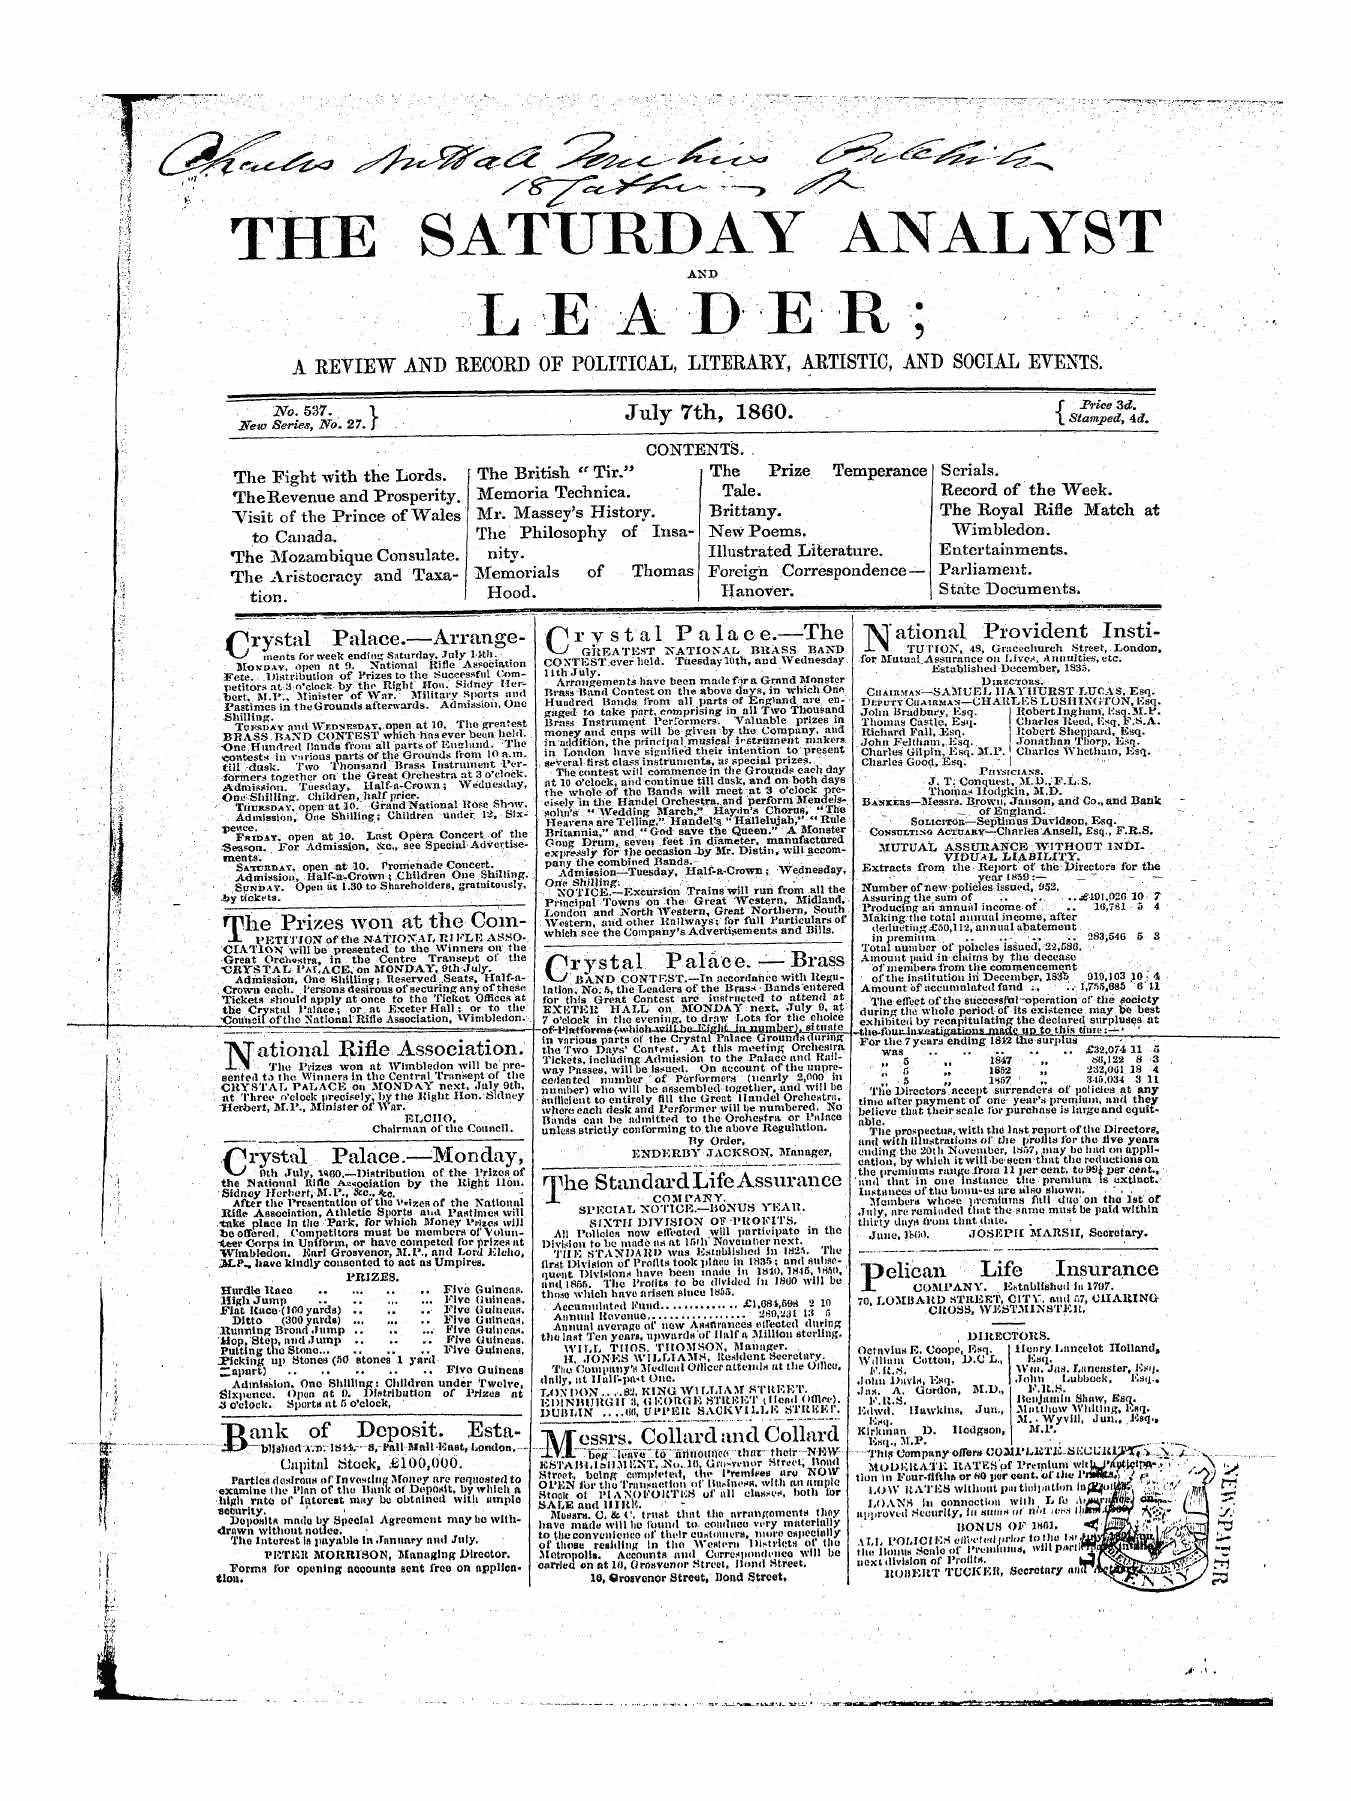 Leader (1850-1860): jS F Y, 1st edition: 1